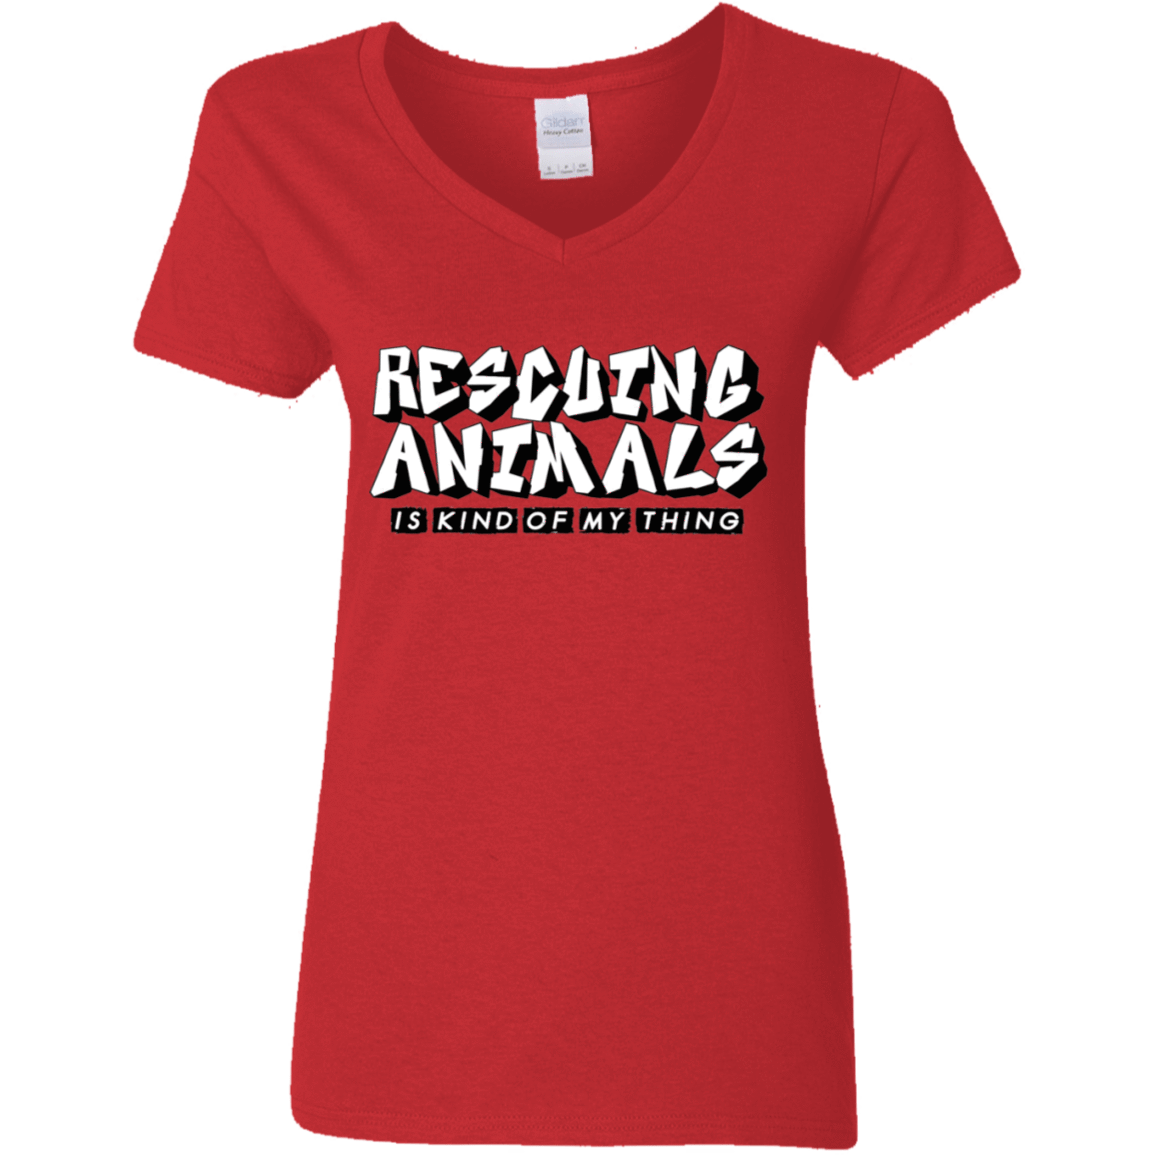 Rescuing Animals is My Kind Of Thing - Ladies V Neck.